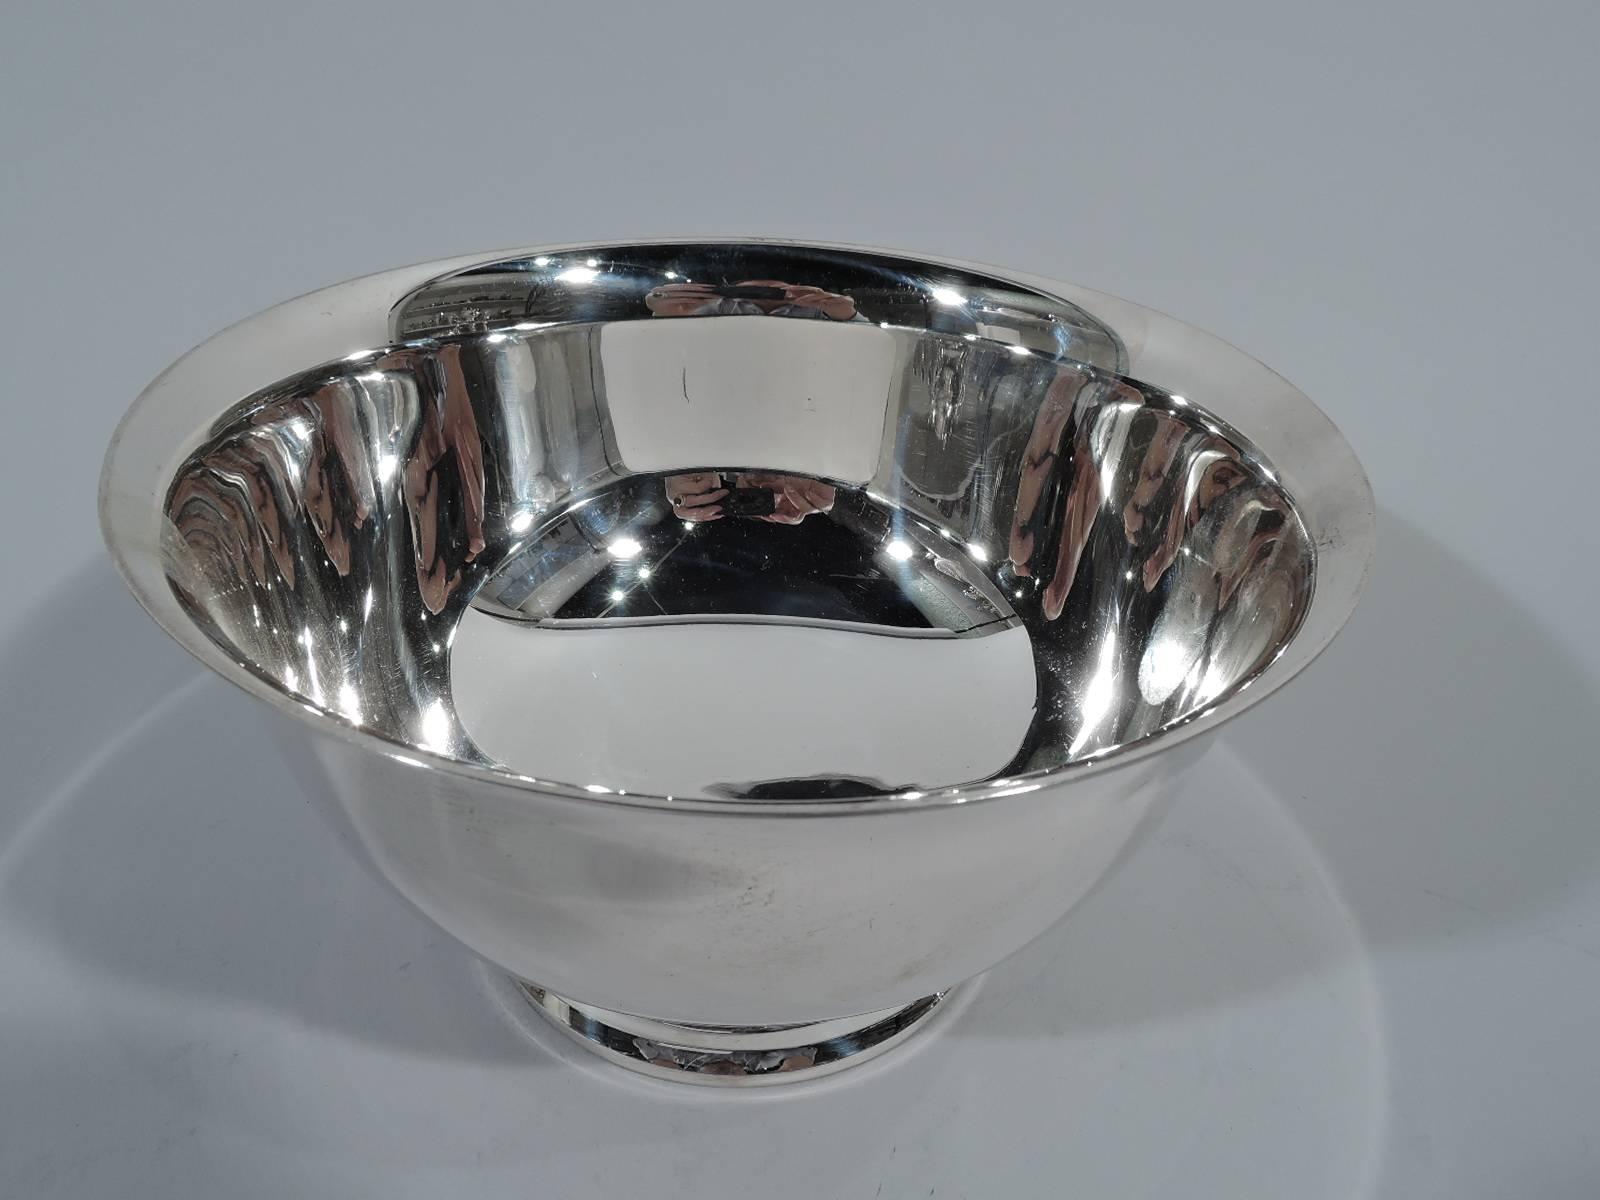 Traditional sterling silver revere bowl. Made by Gorham in Providence in 1948. Curved with flared rim and stepped foot. A historic form that can suit many modern uses. Hallmark includes date code, no. 41659, and phrase “P. Revere Reproduction”.